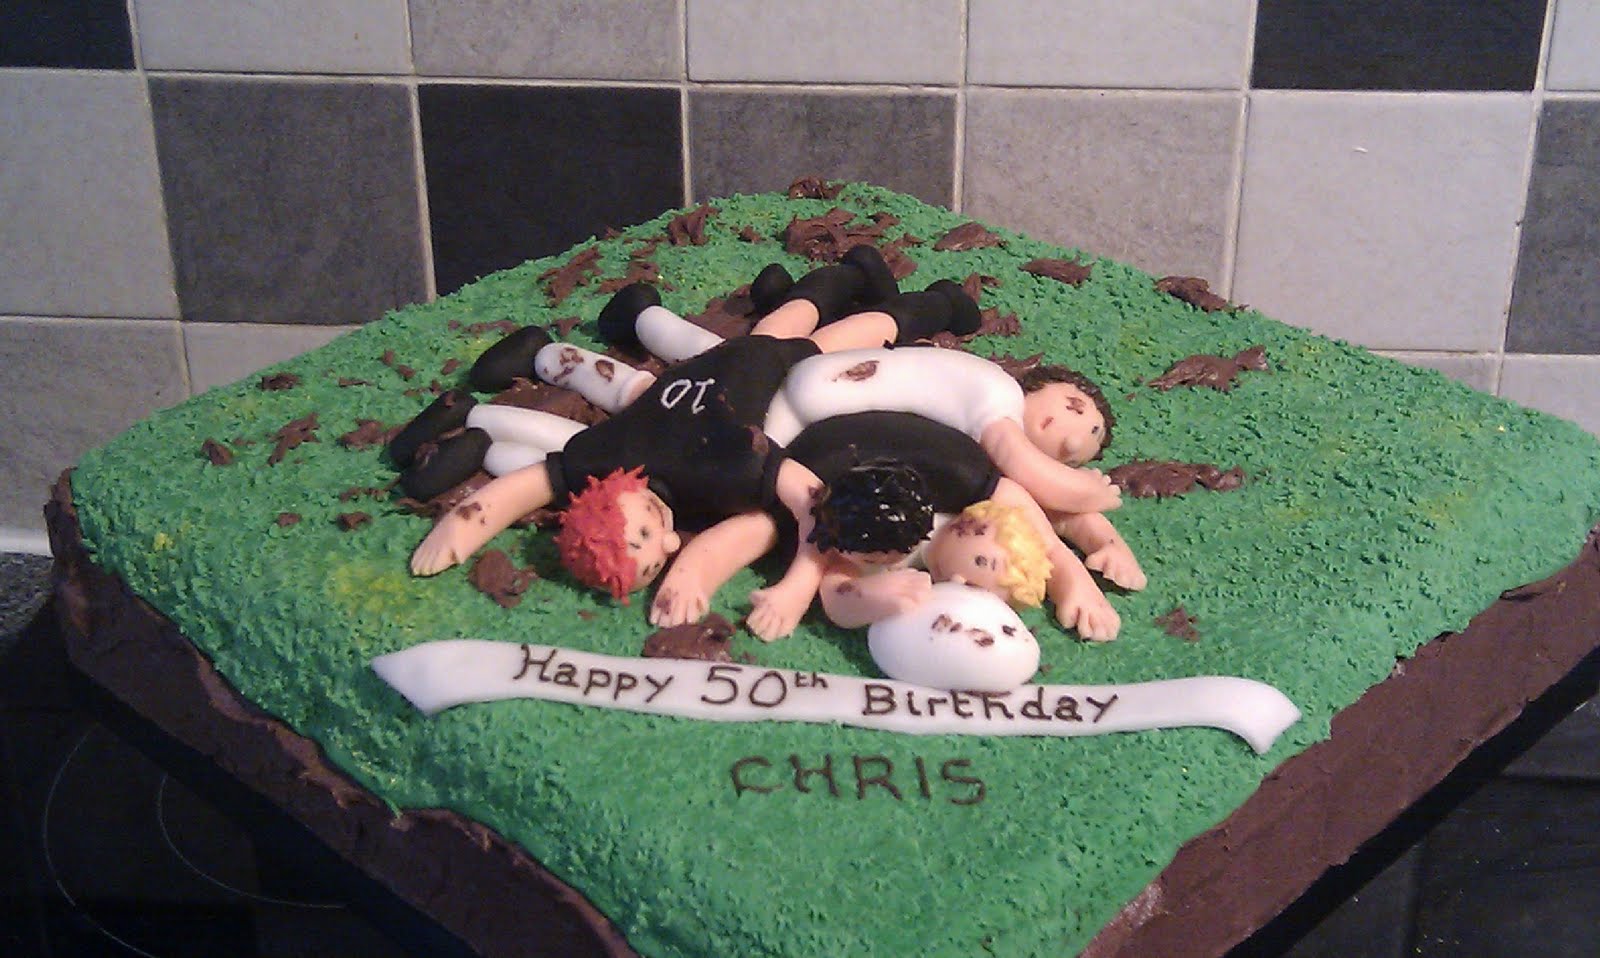 ... the rugby tackle cake this time with england and new zealand players